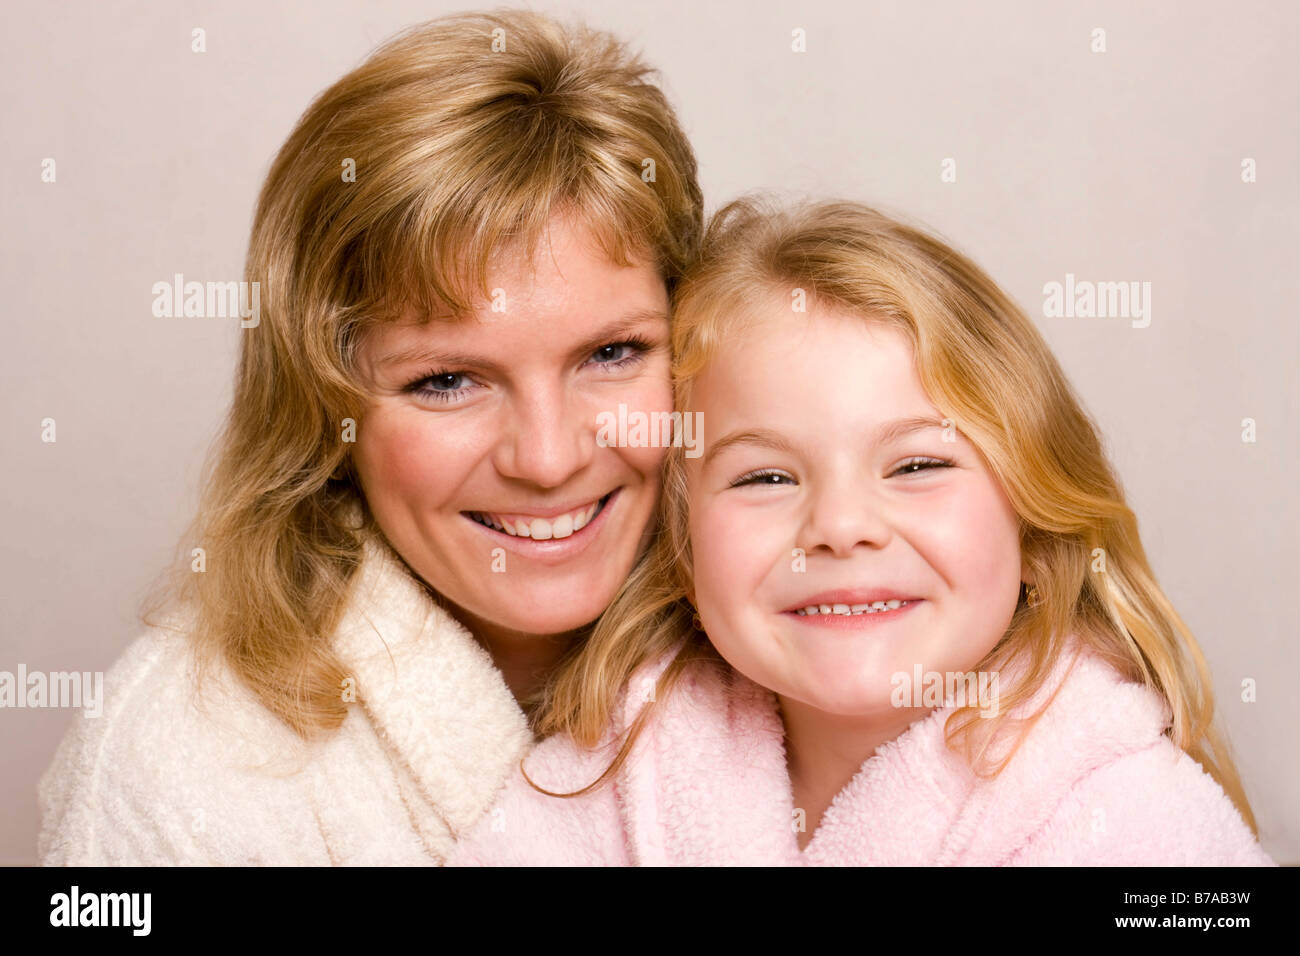 5 year old girl with her mother, 31 years old Stock Photo